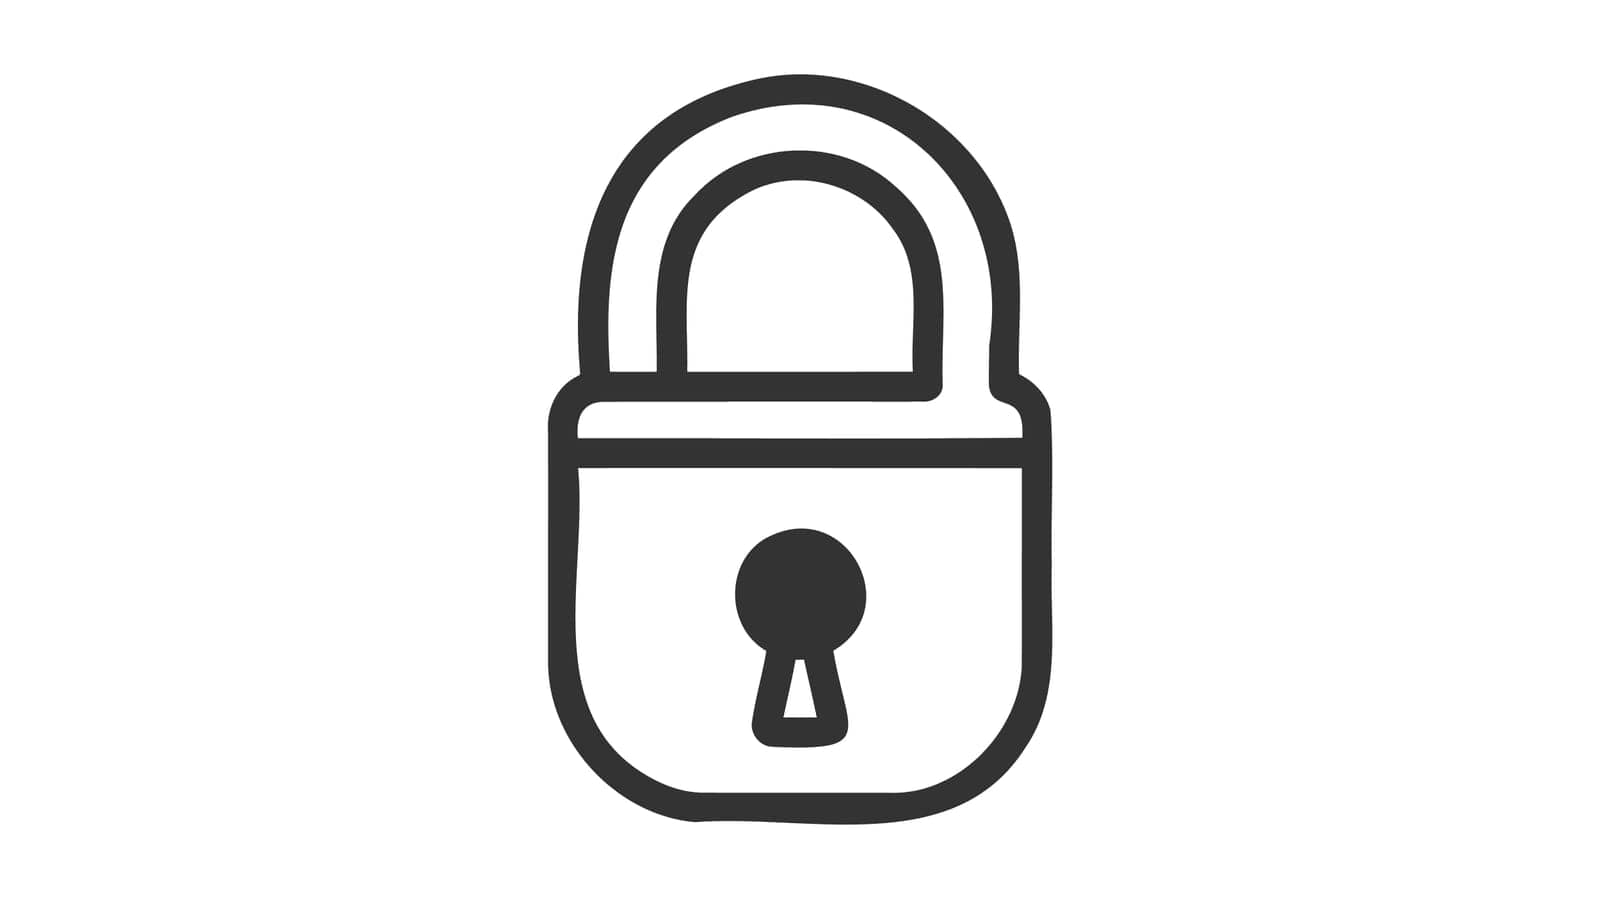 Protection icon vector. Padlock icon on white background by Artisttop